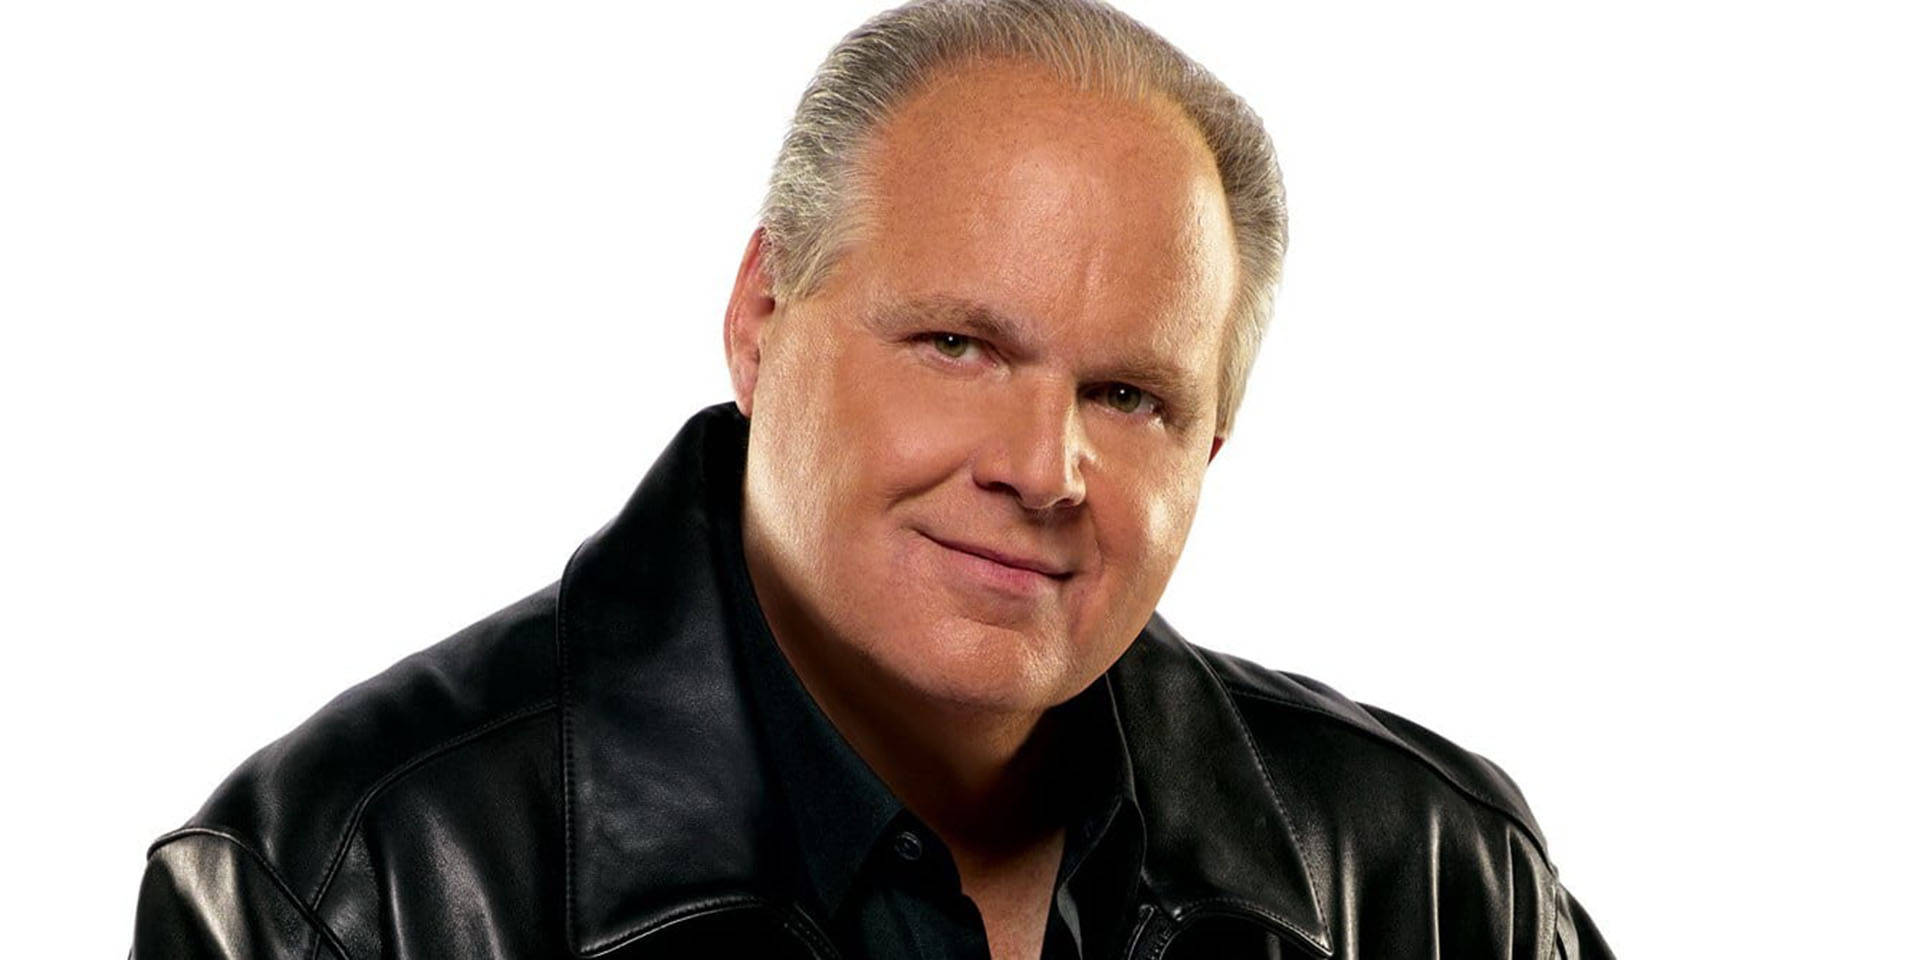 Rush Limbaugh On A White Background Background